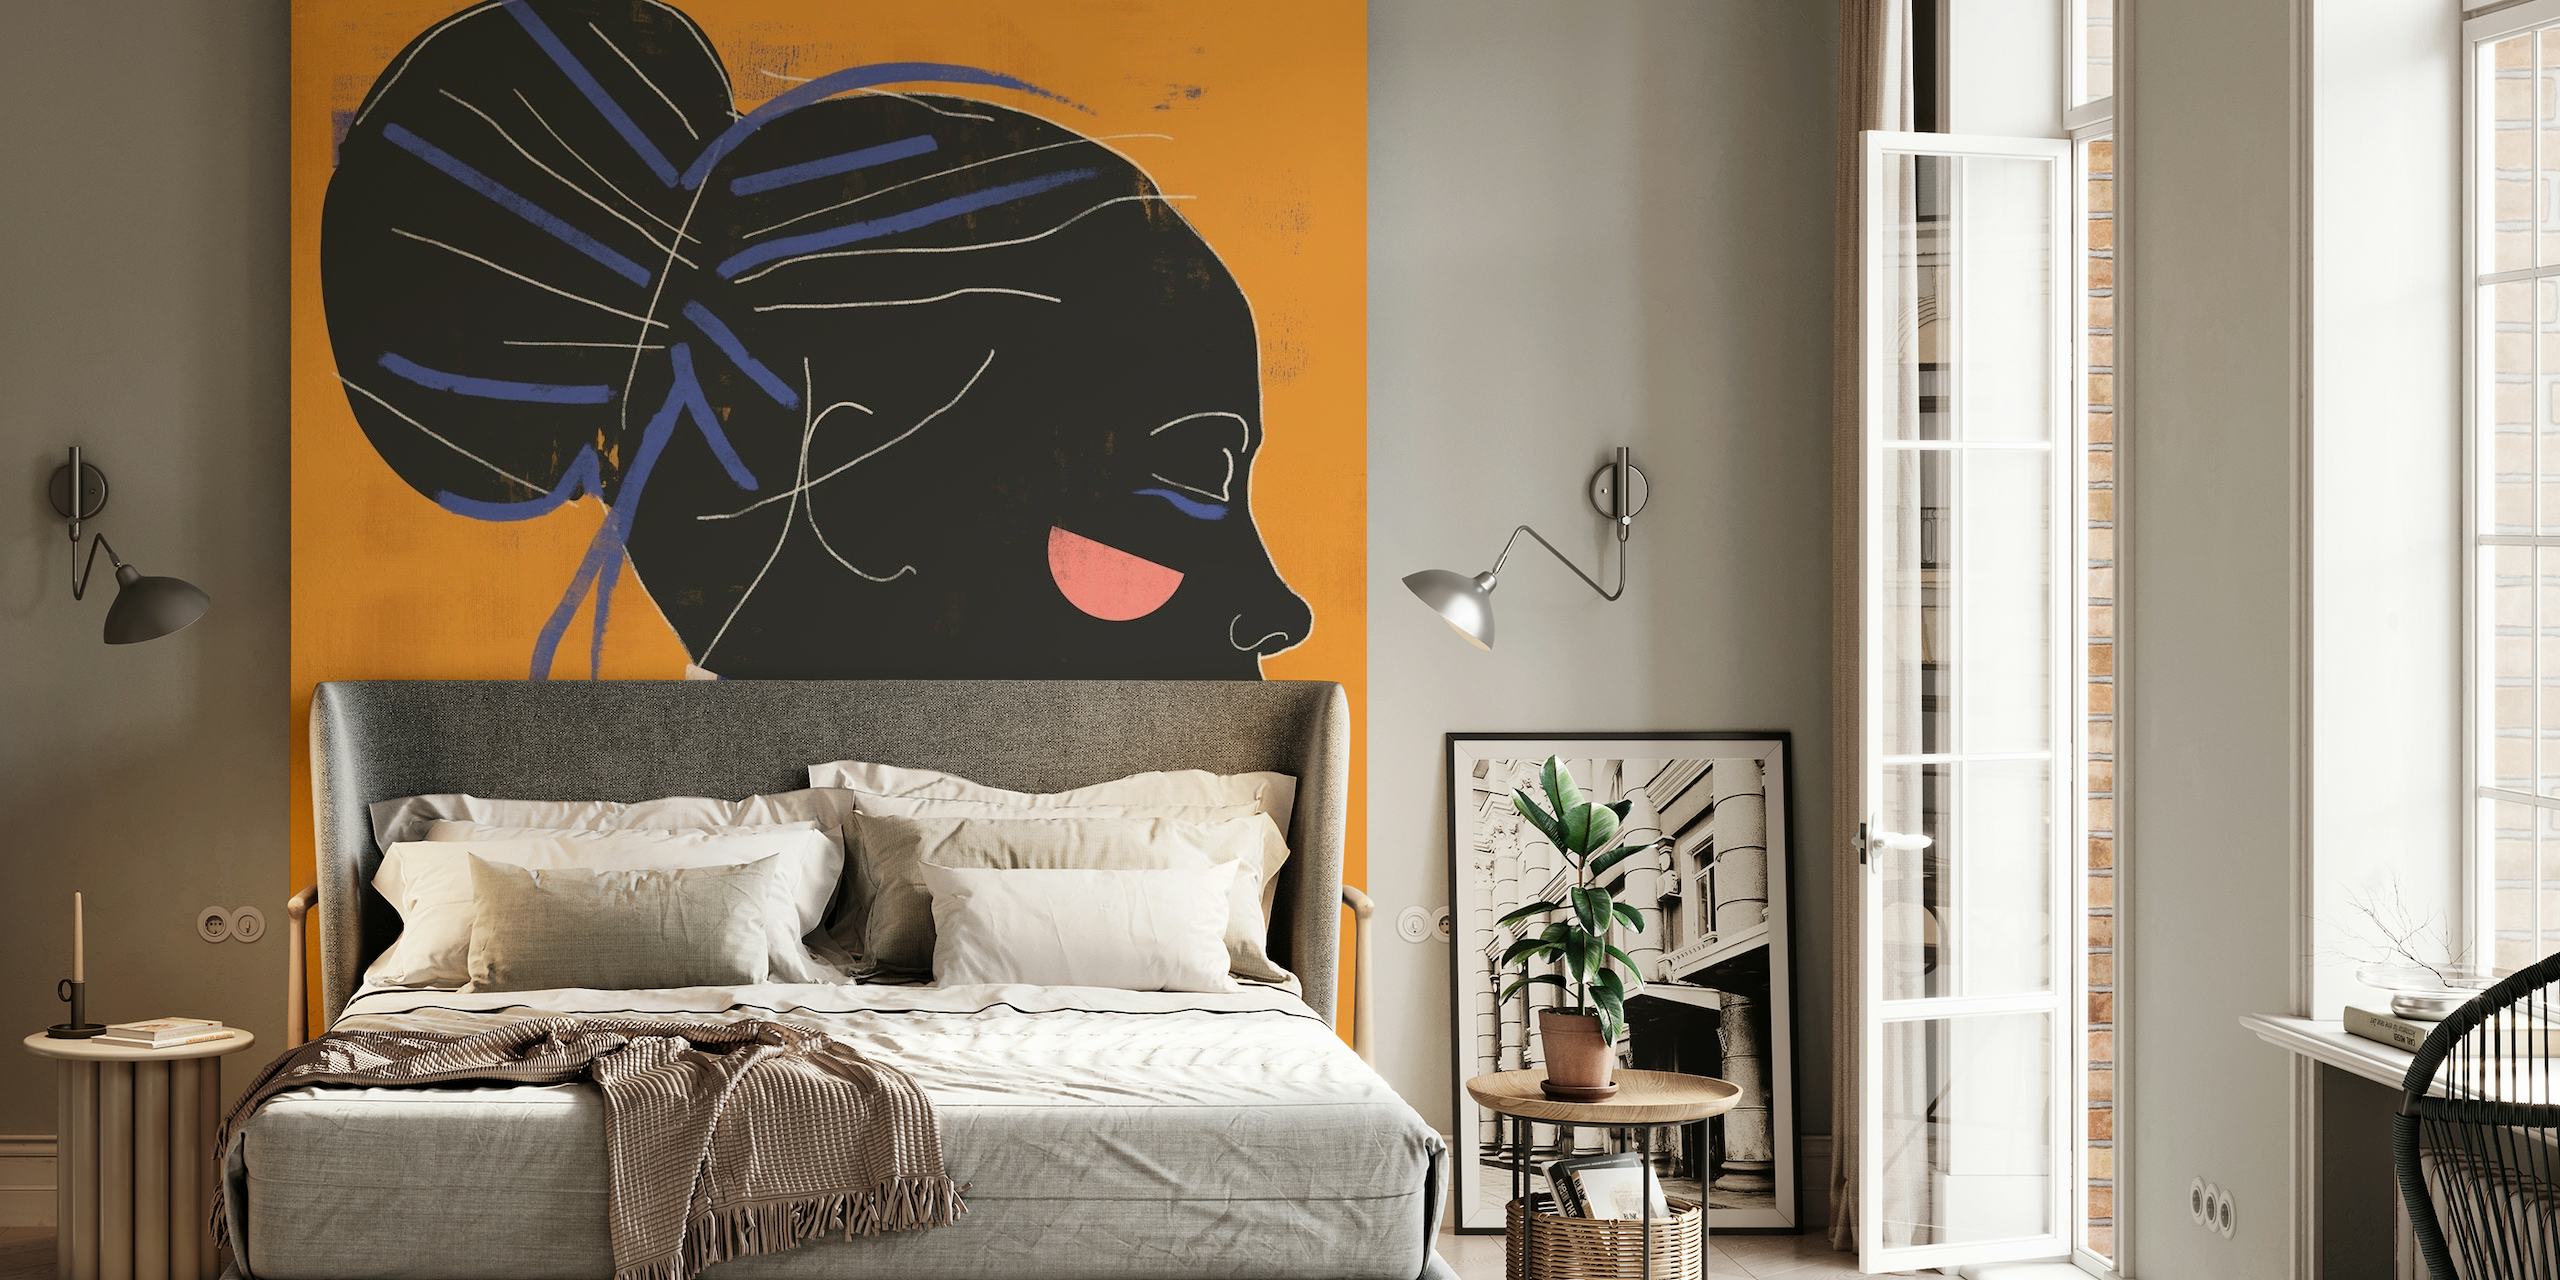 Abstract female profile wall mural in blue on an orange background